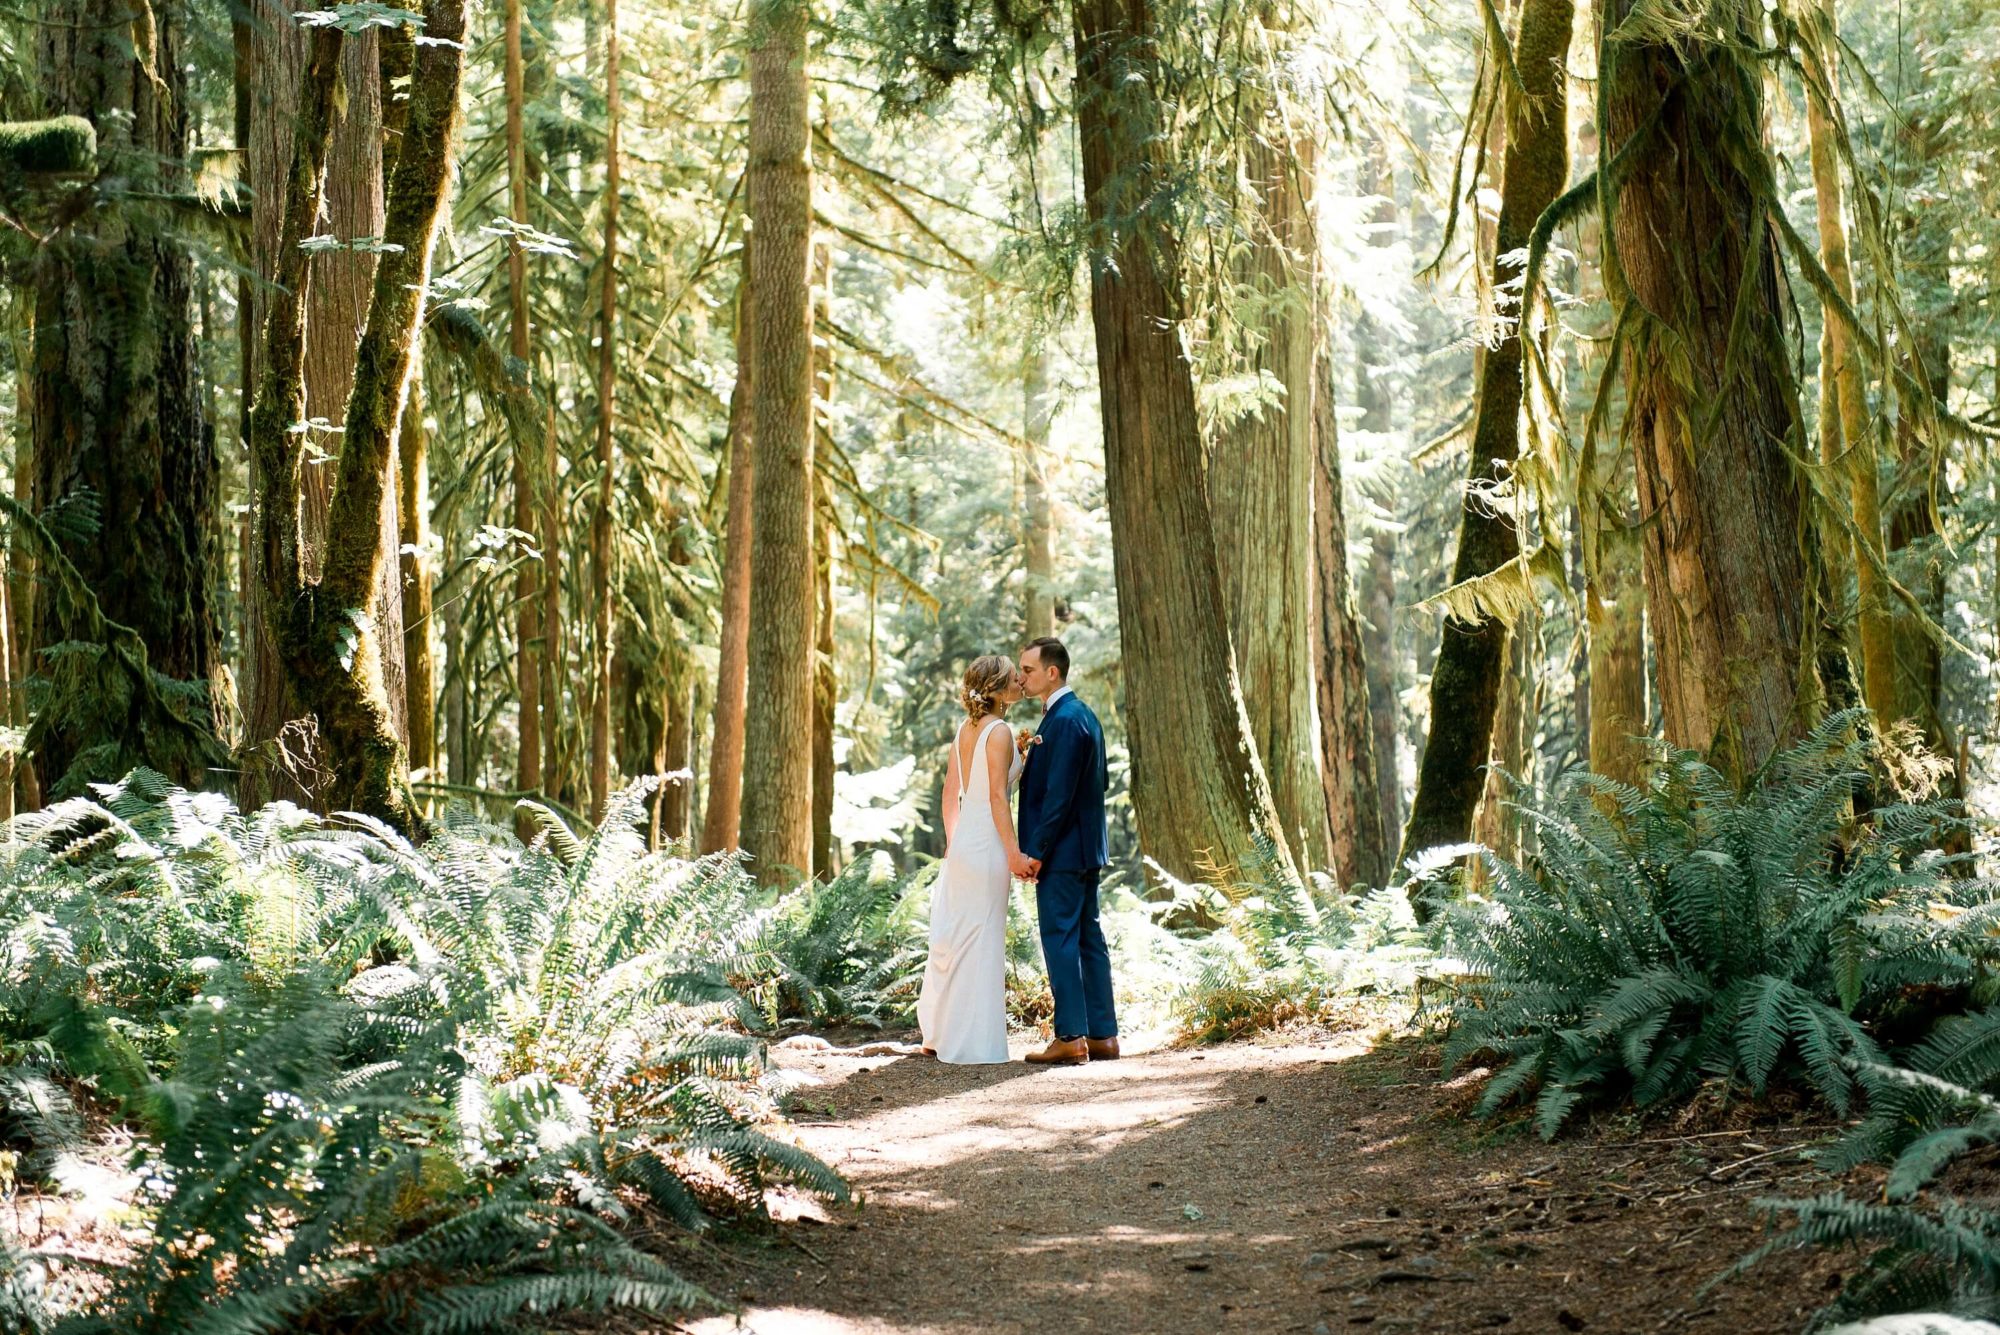 Bride and Groom at Ceremony area at Fern Acres Forks Forest Wedding Venue